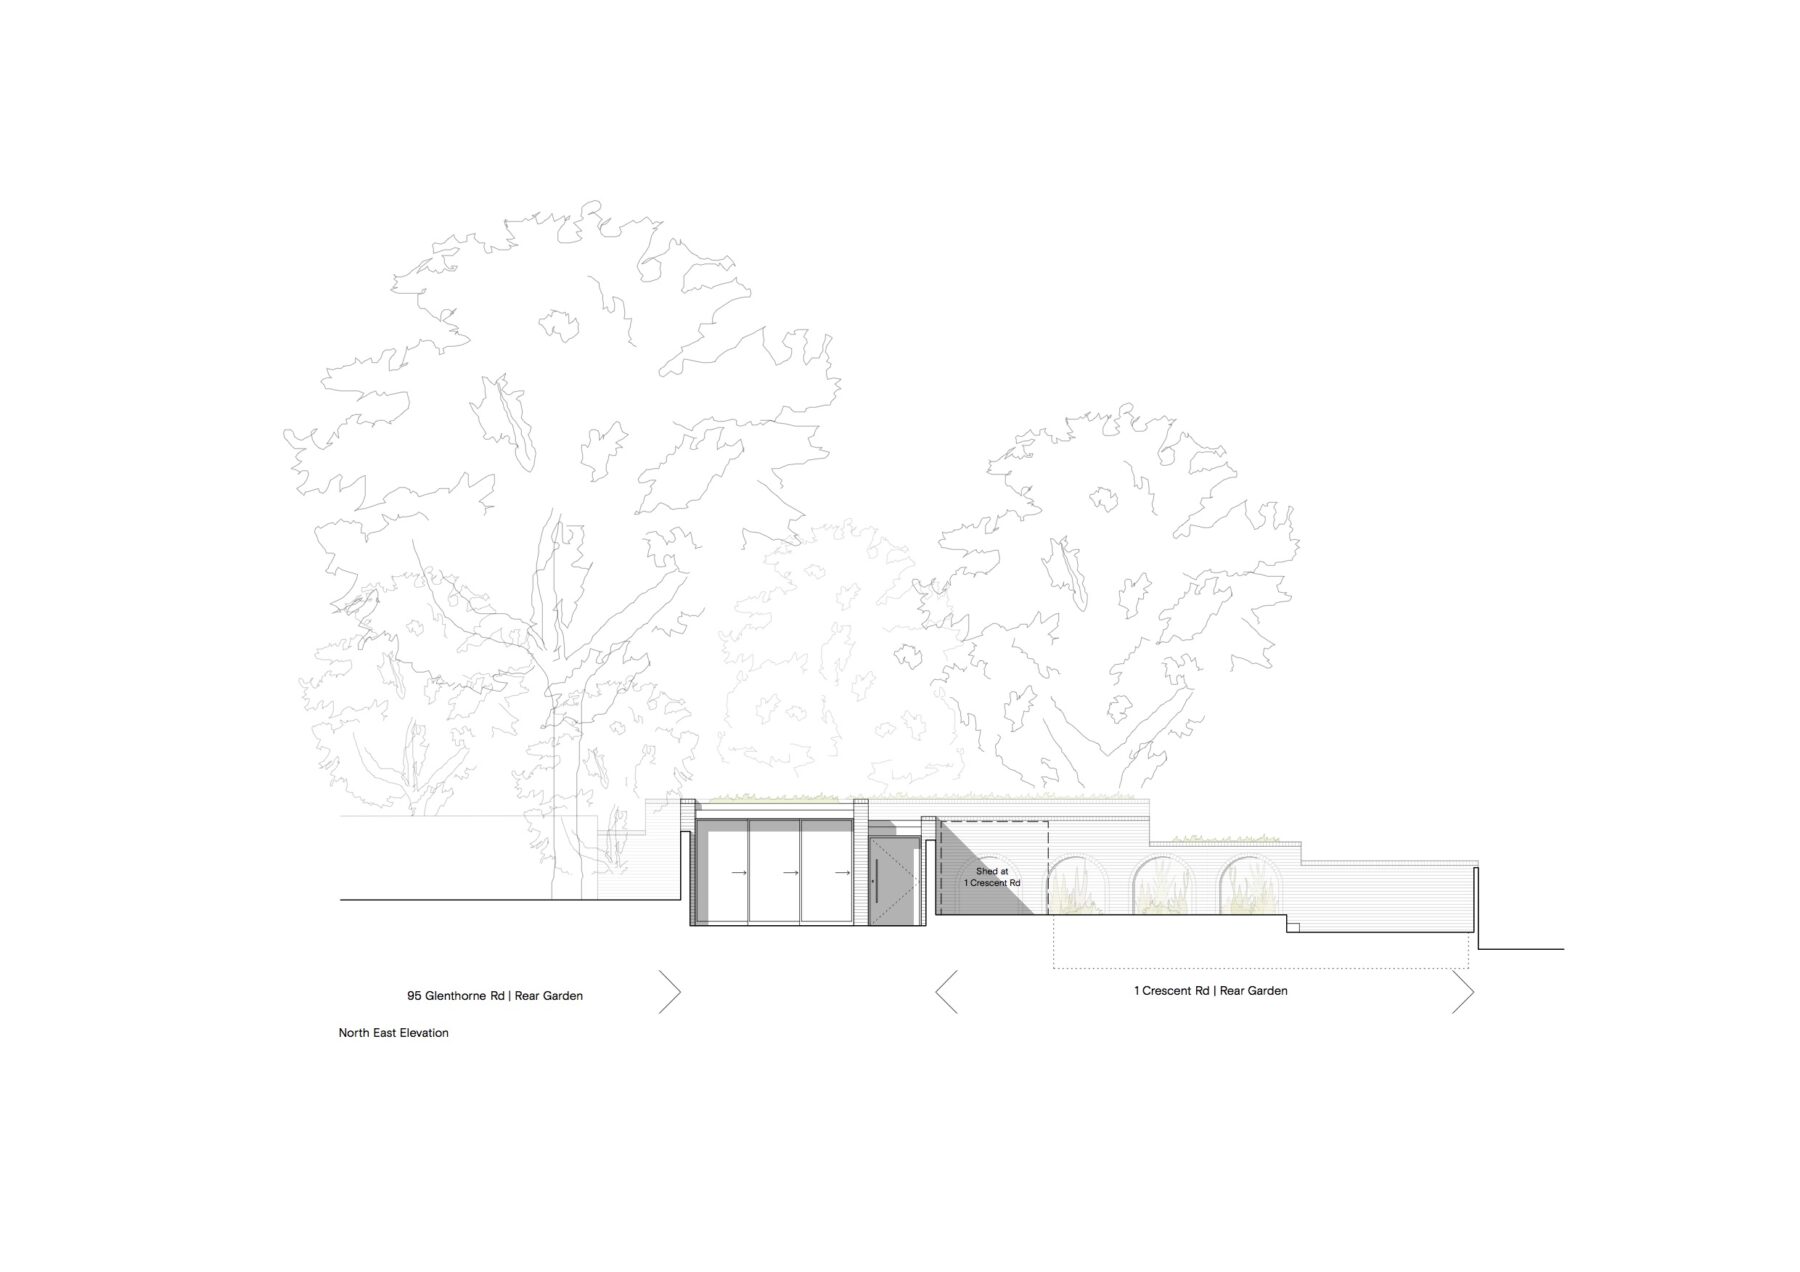 Proposed front elevation of development